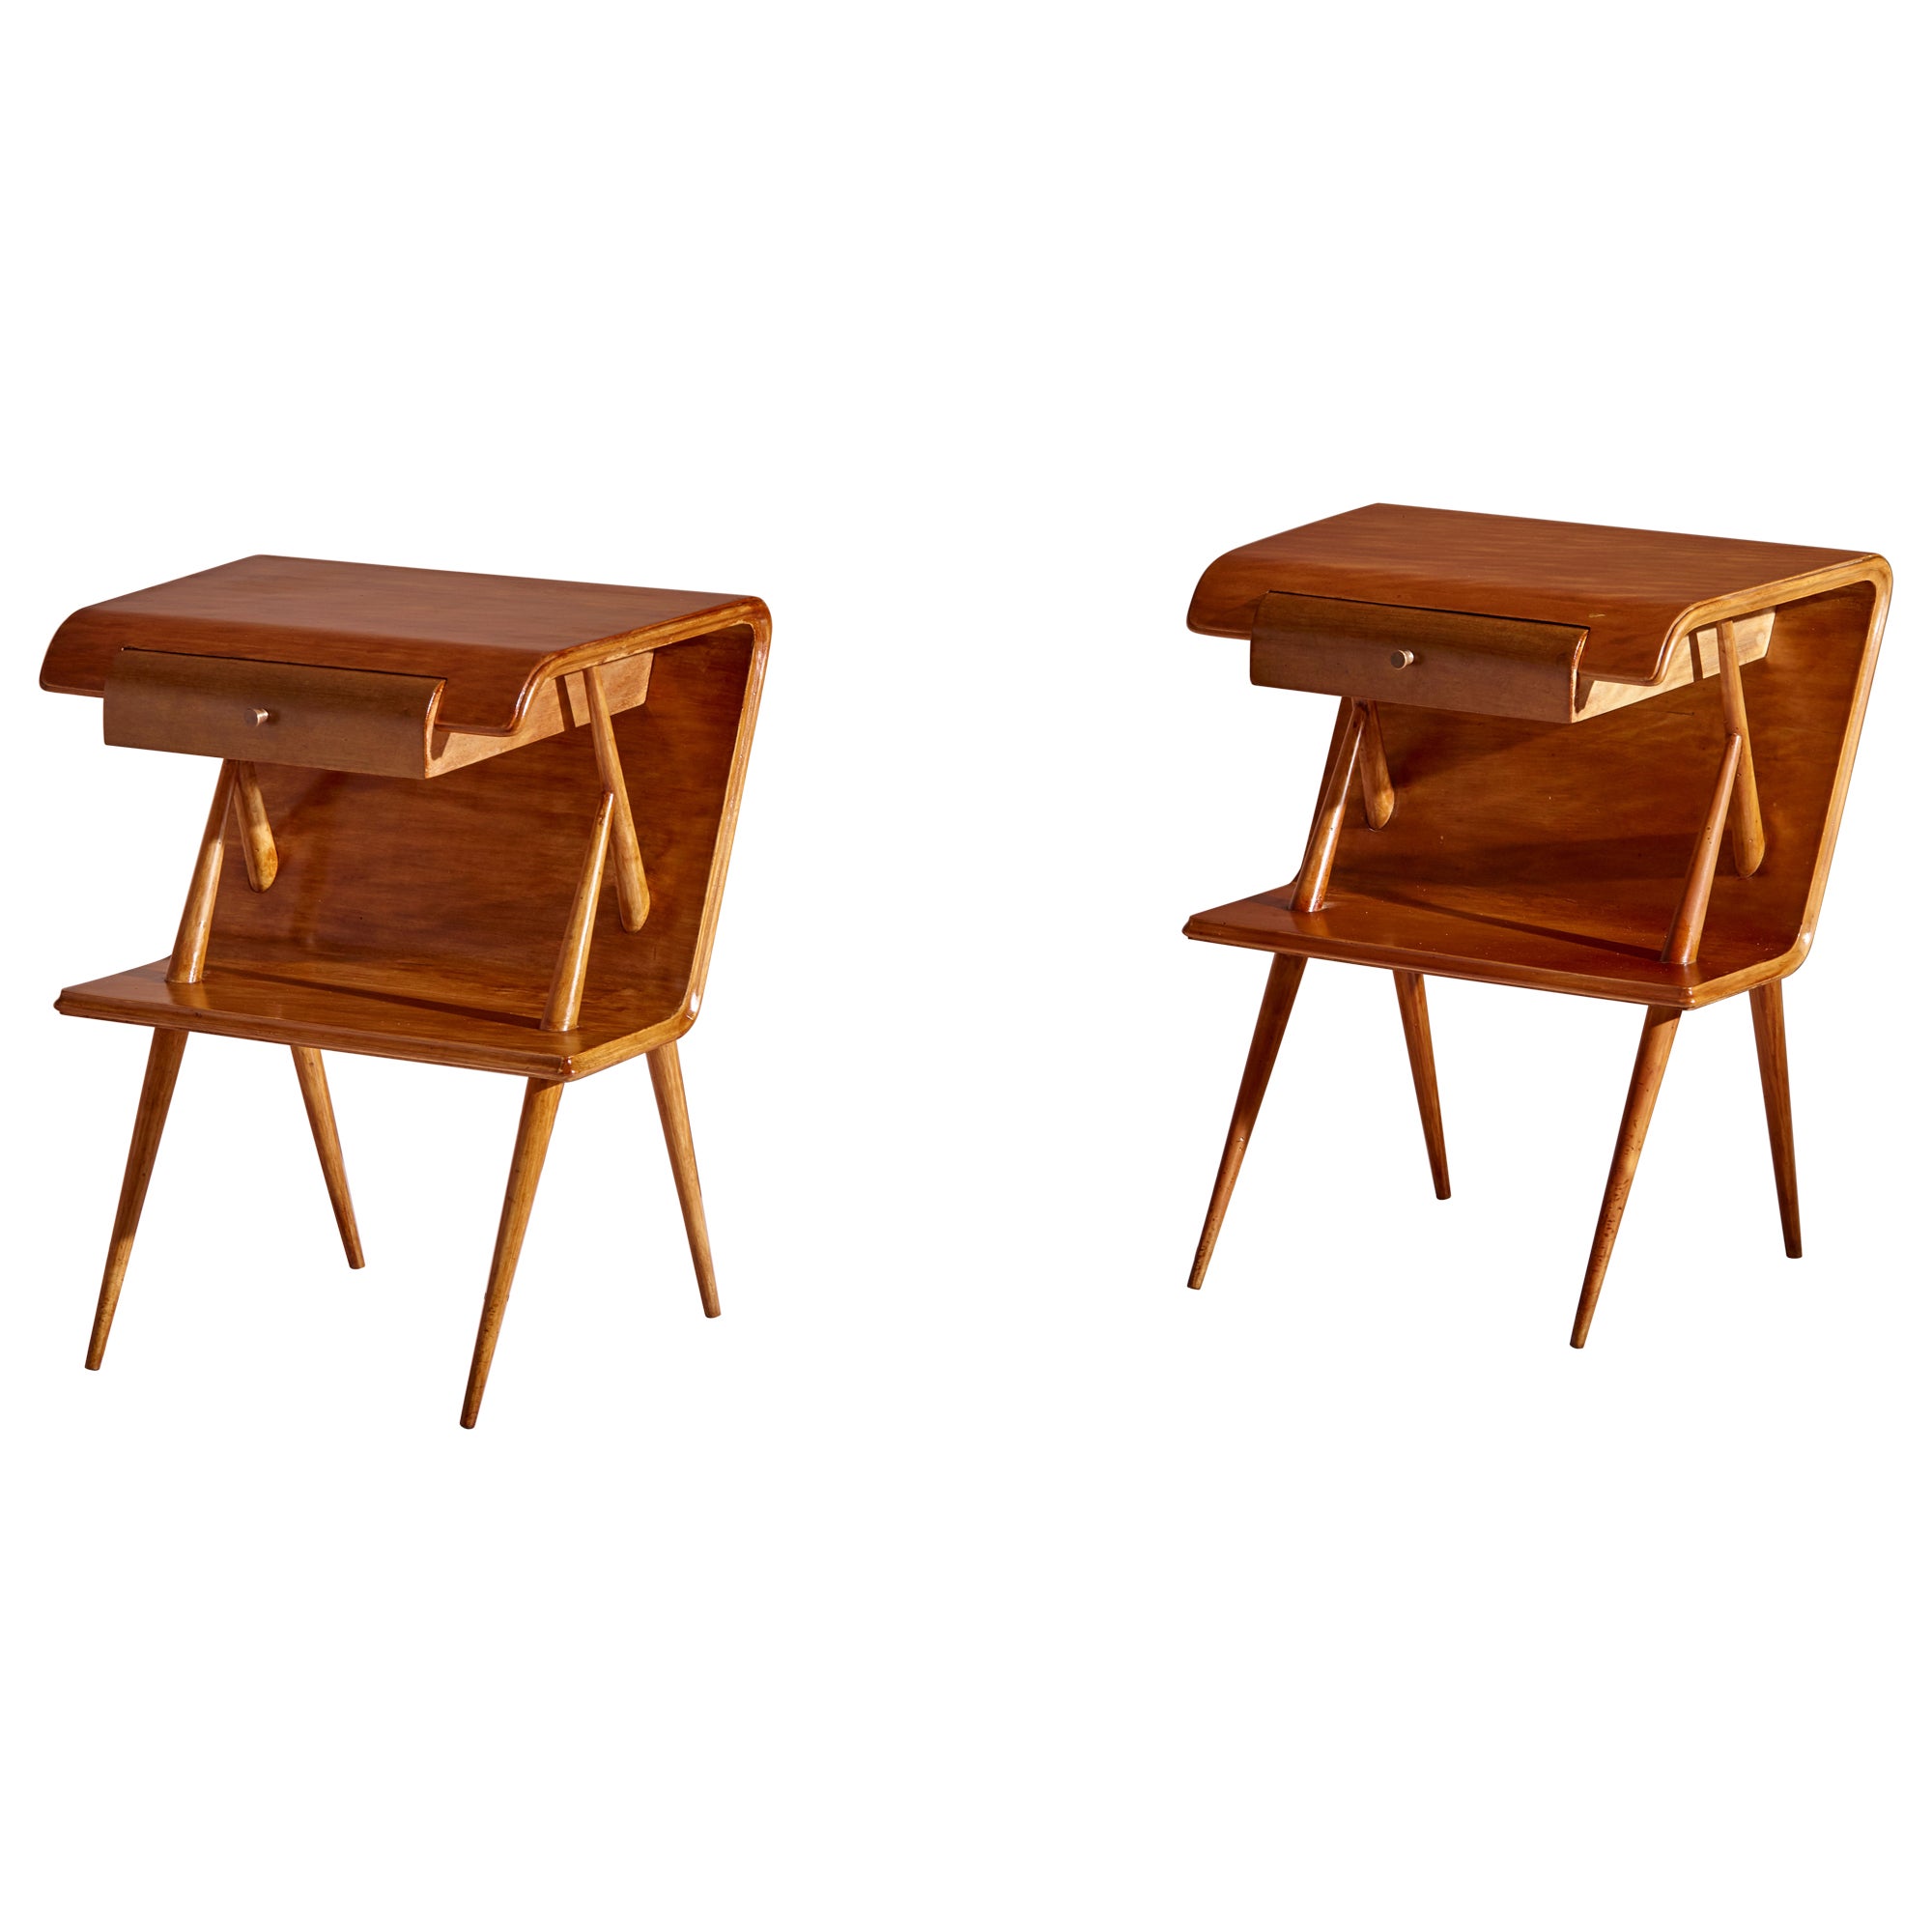 Pair of curved plywood bedside tables, Italy, 1950s For Sale